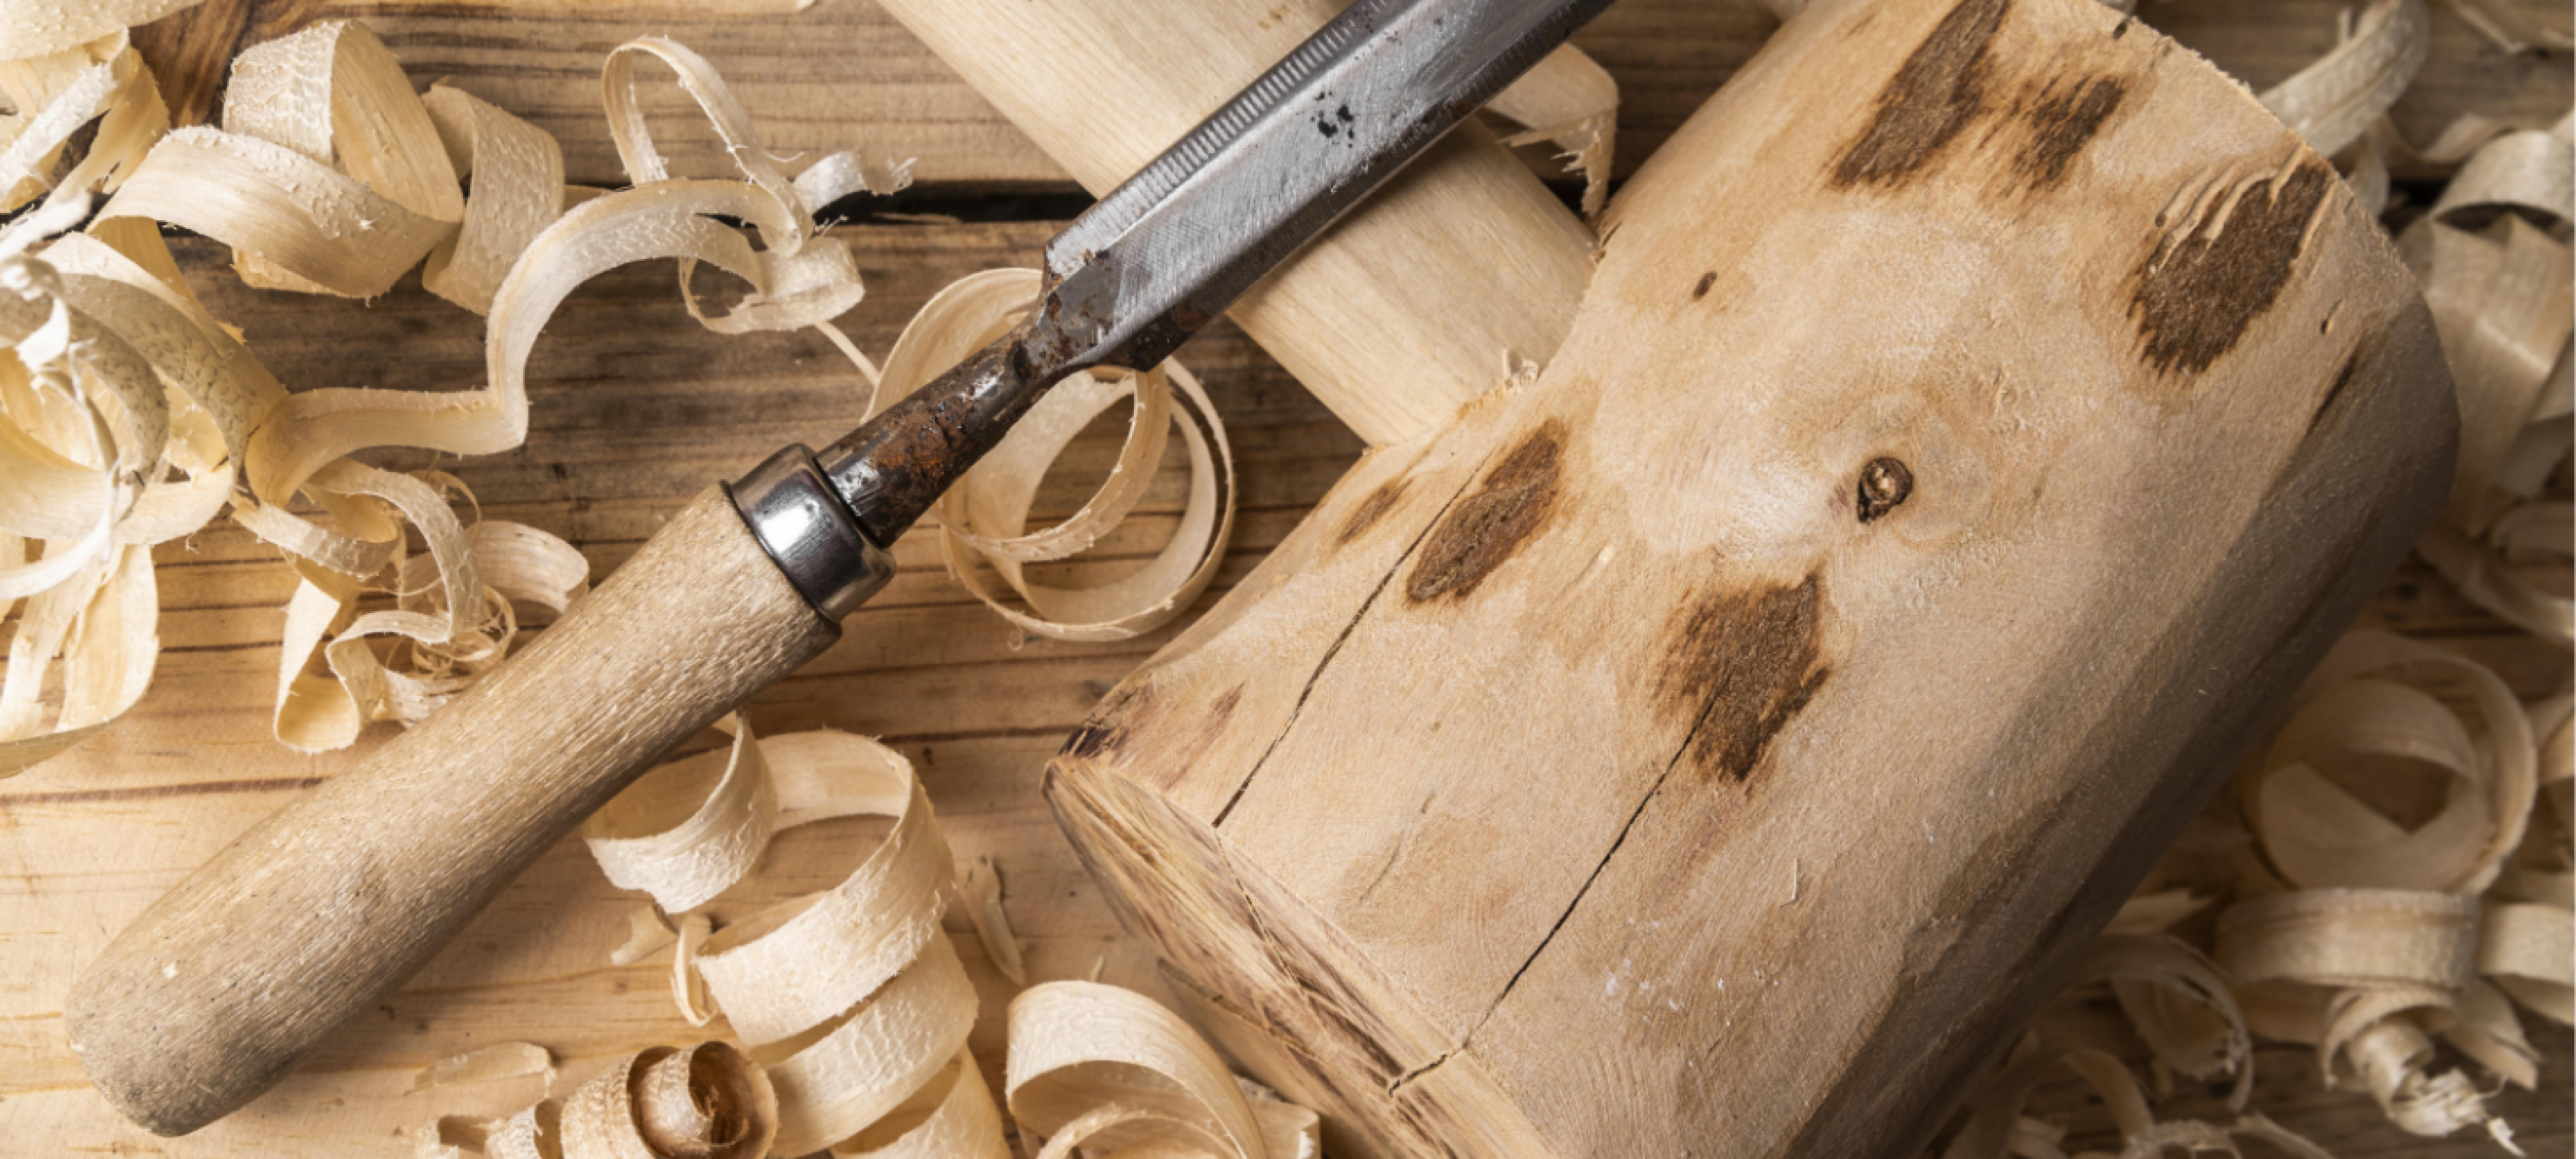 8 Best Wood Carving Knives for Beginners